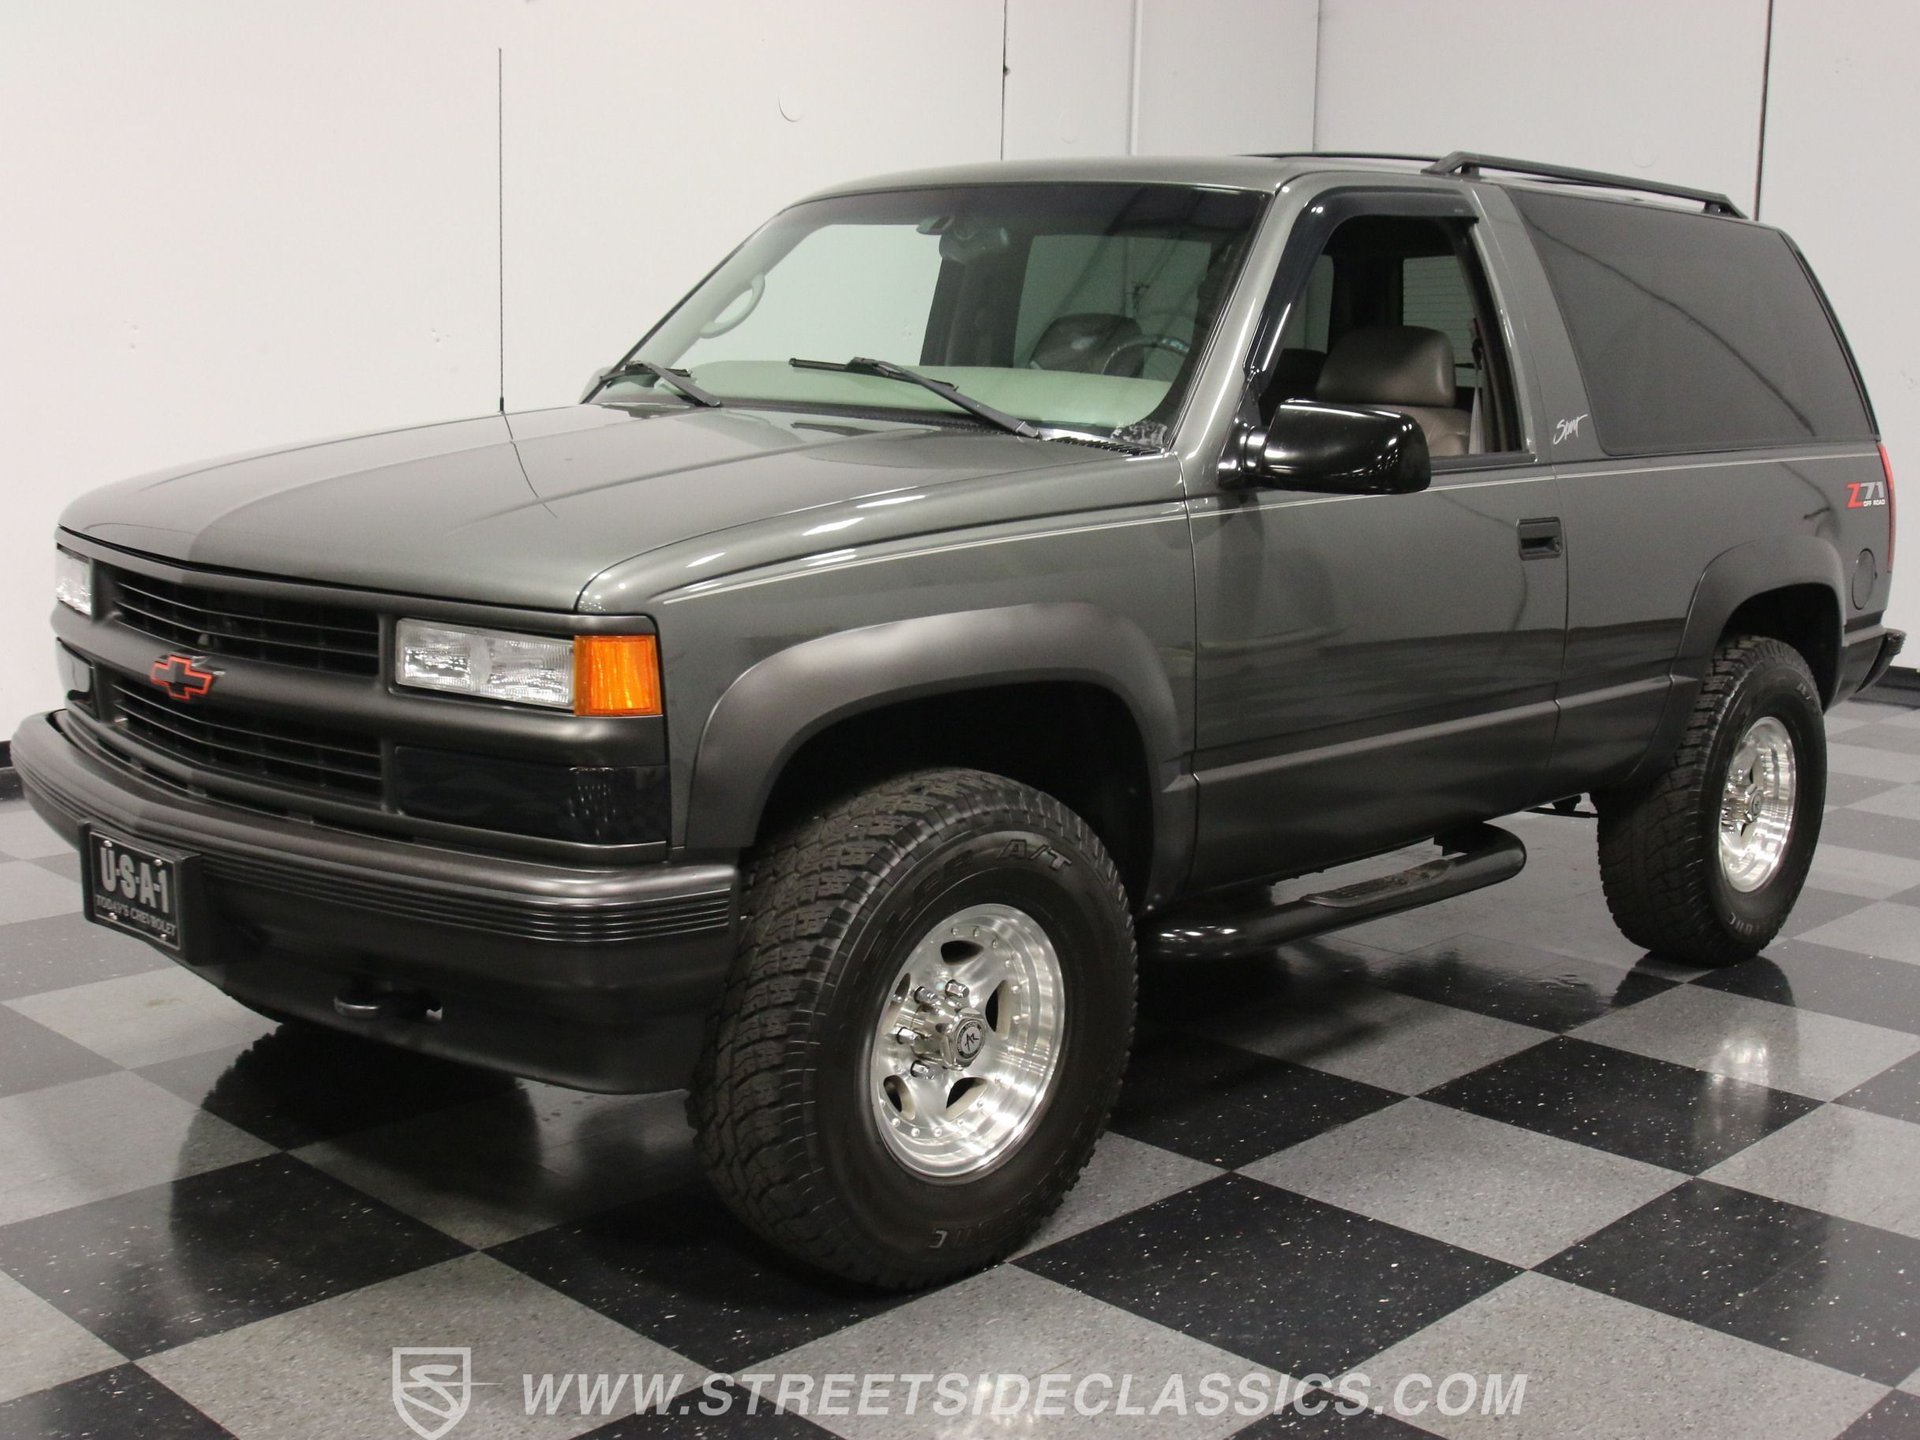 1999 Chevrolet Tahoe | Streetside Classics - The Nation's Trusted